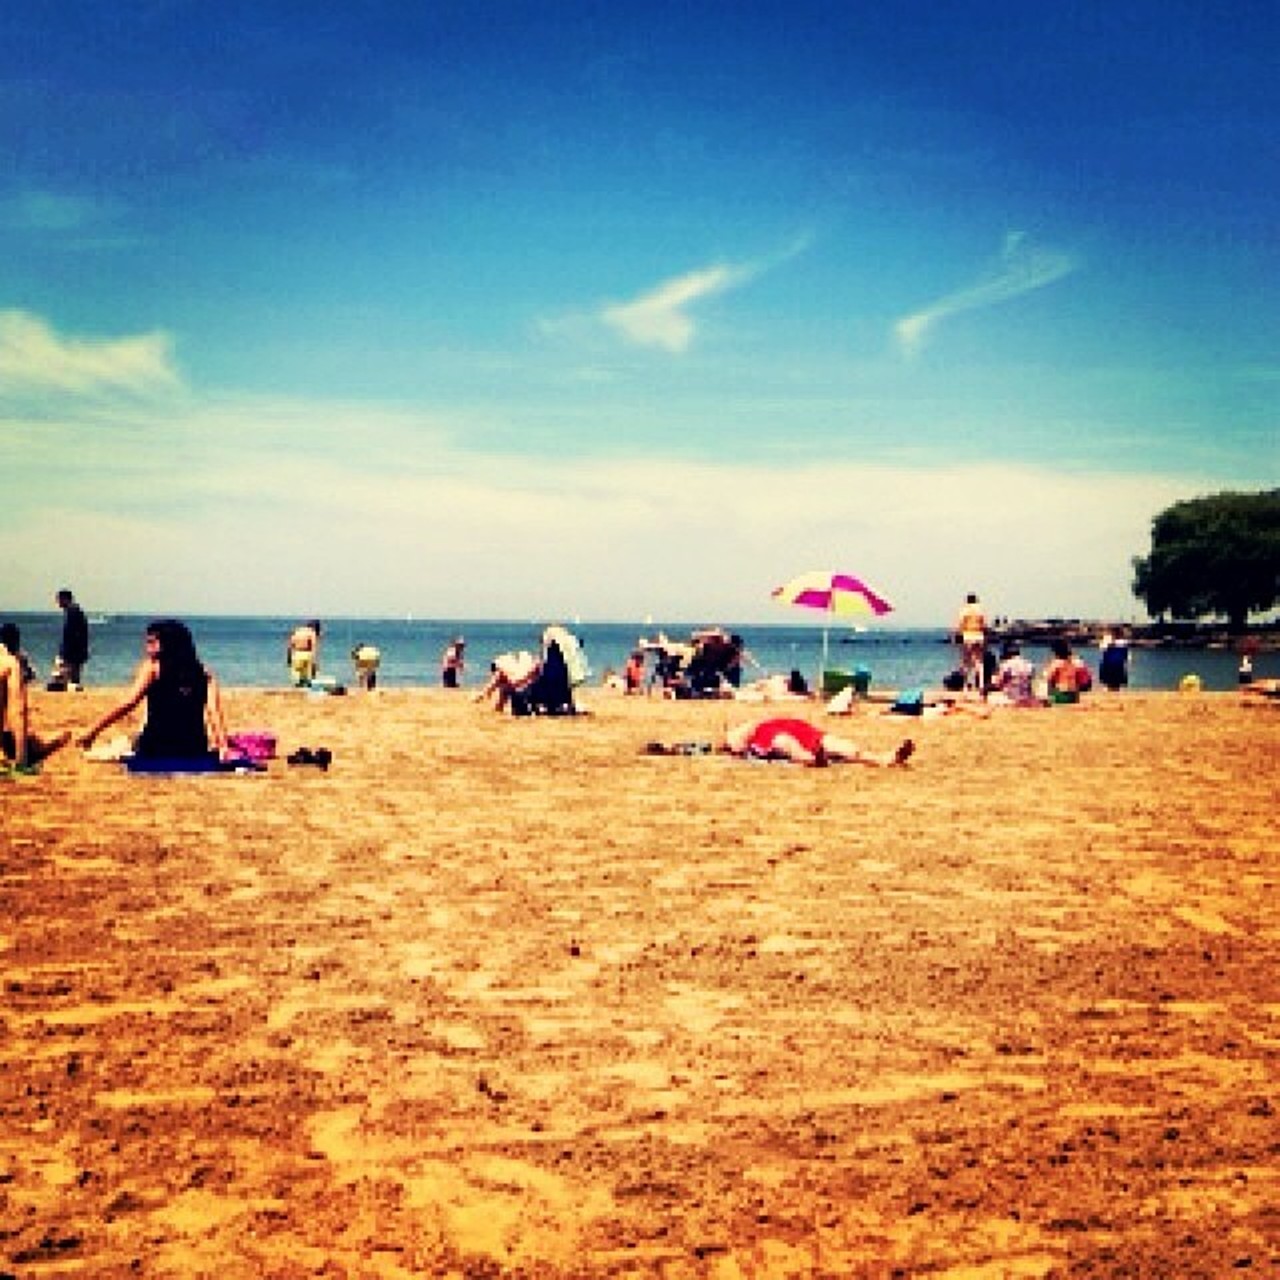 15 Cleveland Beach Pictures that Don't Look Like They're from Cleveland